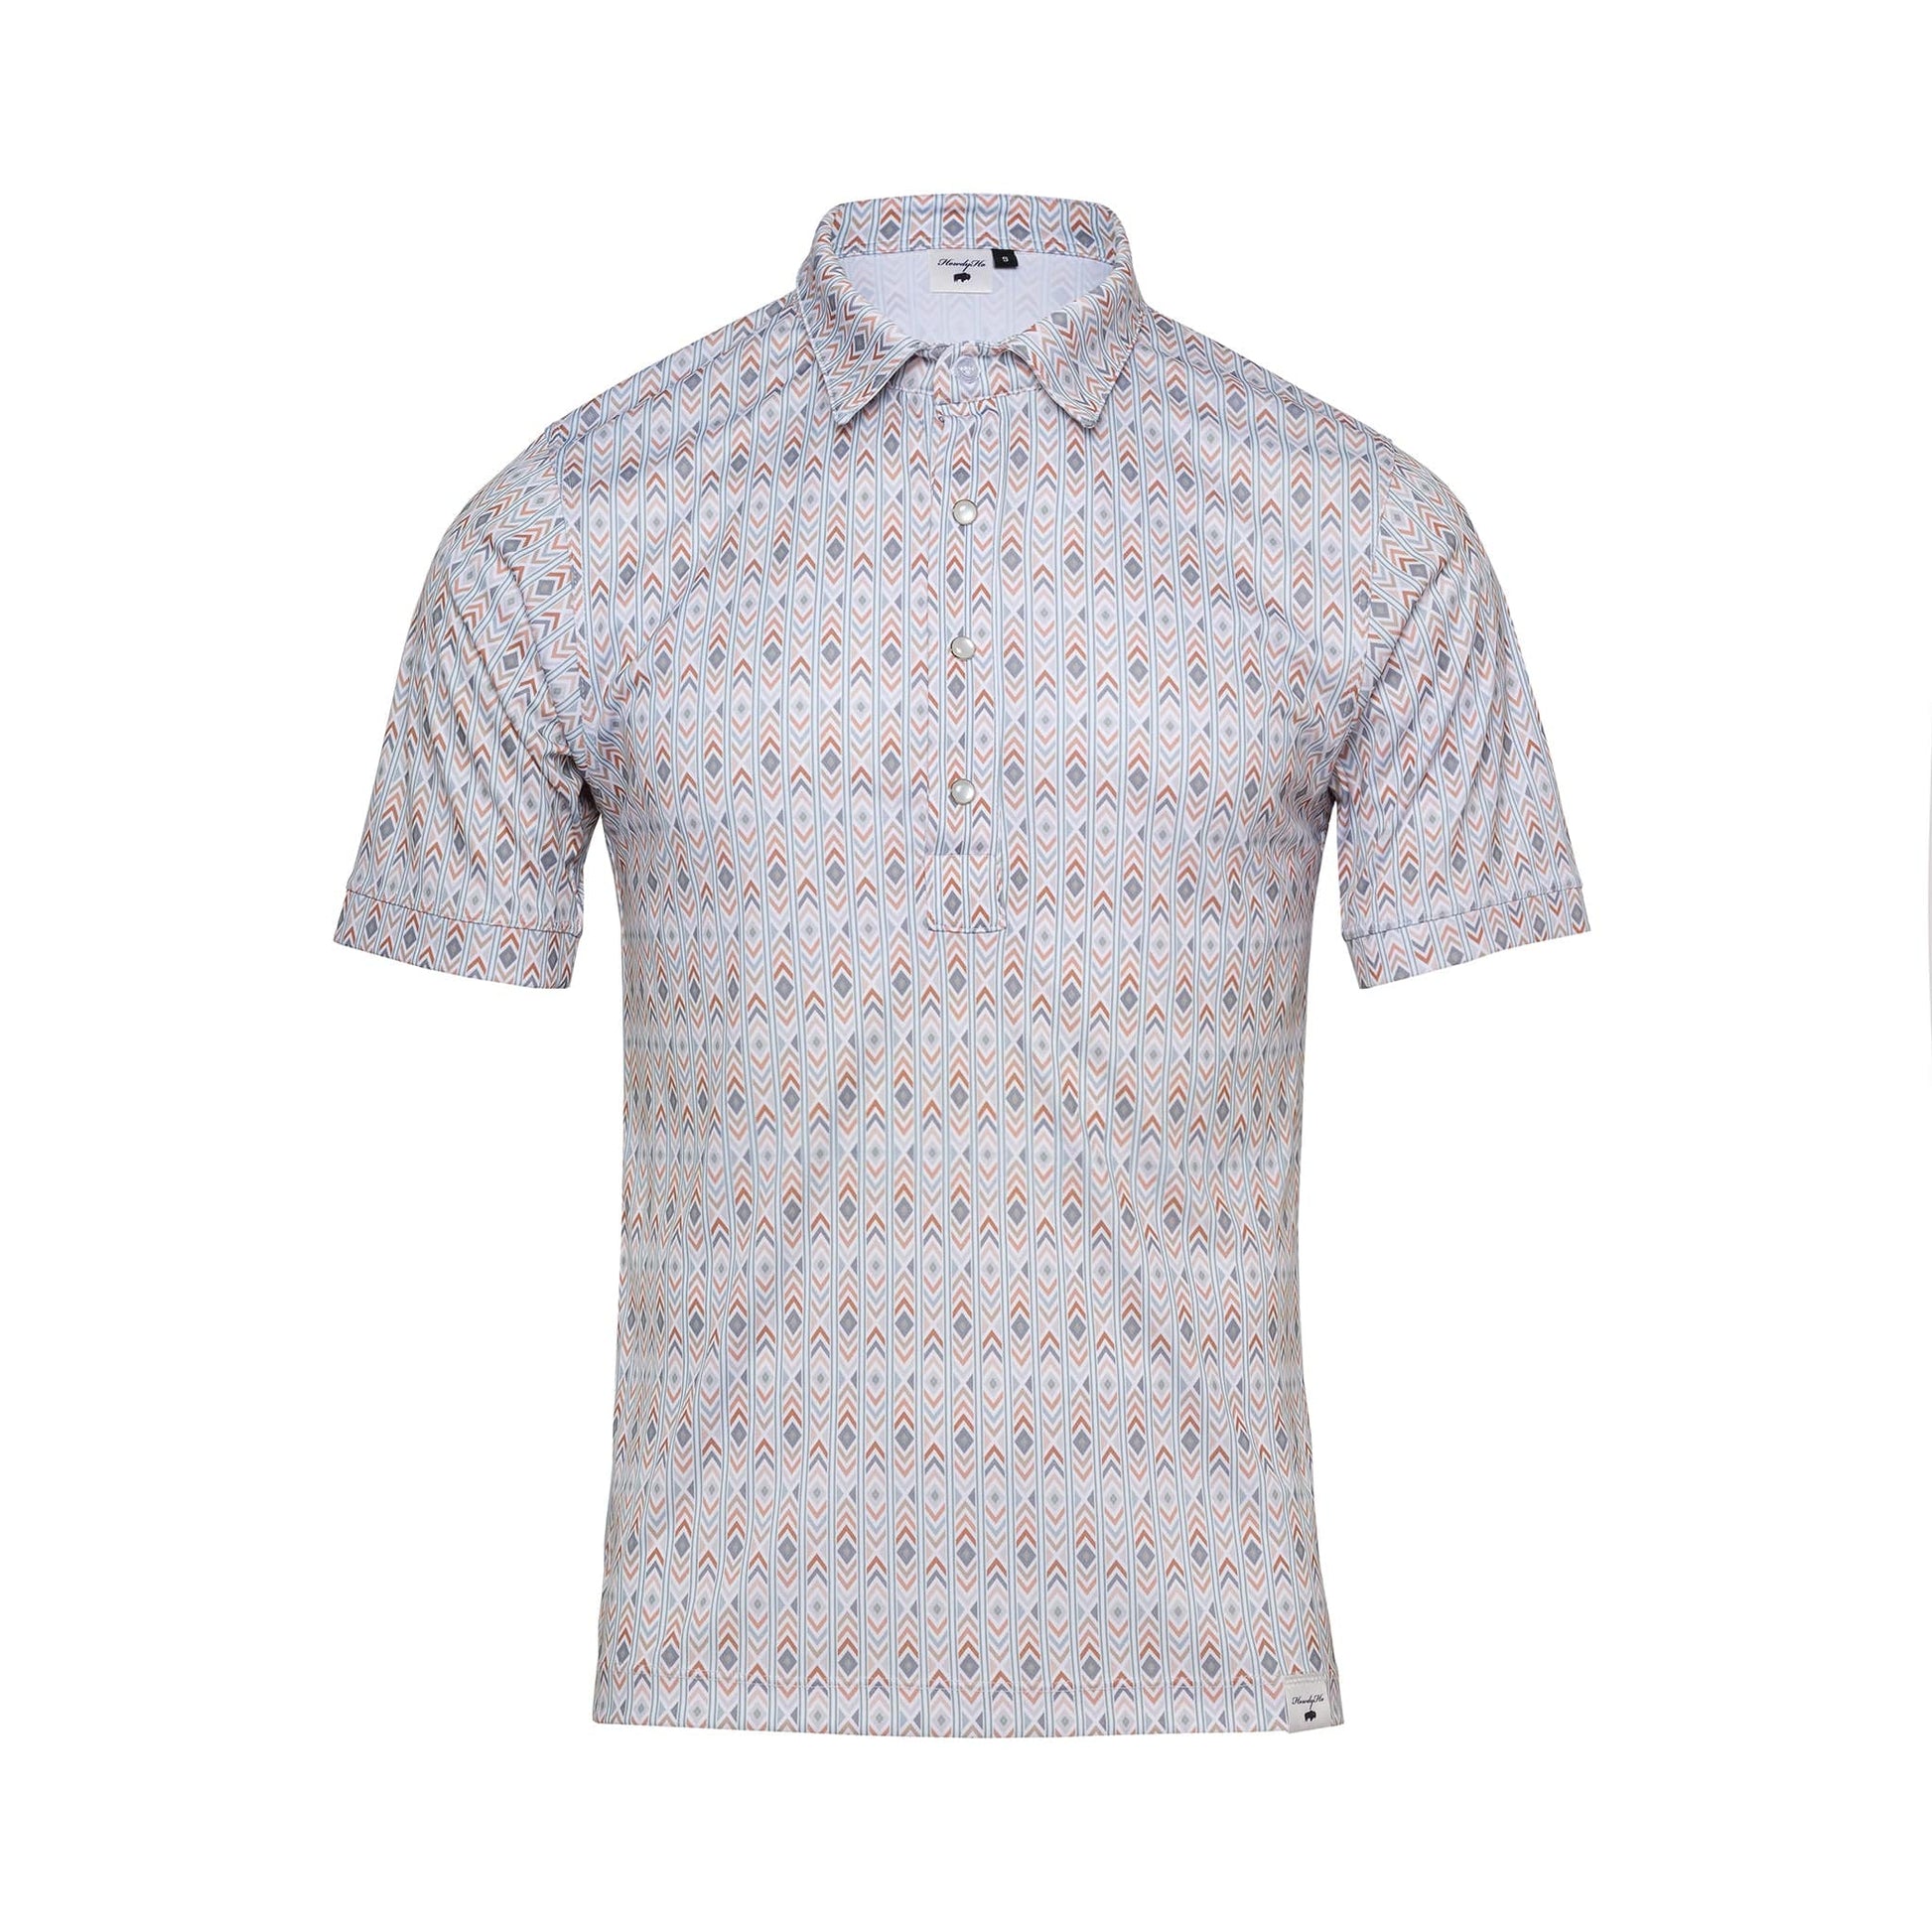 A stylish short-sleeved shirt with a vibrant Aztec-inspired print, featuring an array of geometric shapes in a cool color palette. The shirt has a neat button-up collar and is displayed against a pure white background. Ideal for a casual yet fashionable look, available at HowdyHo's online store.